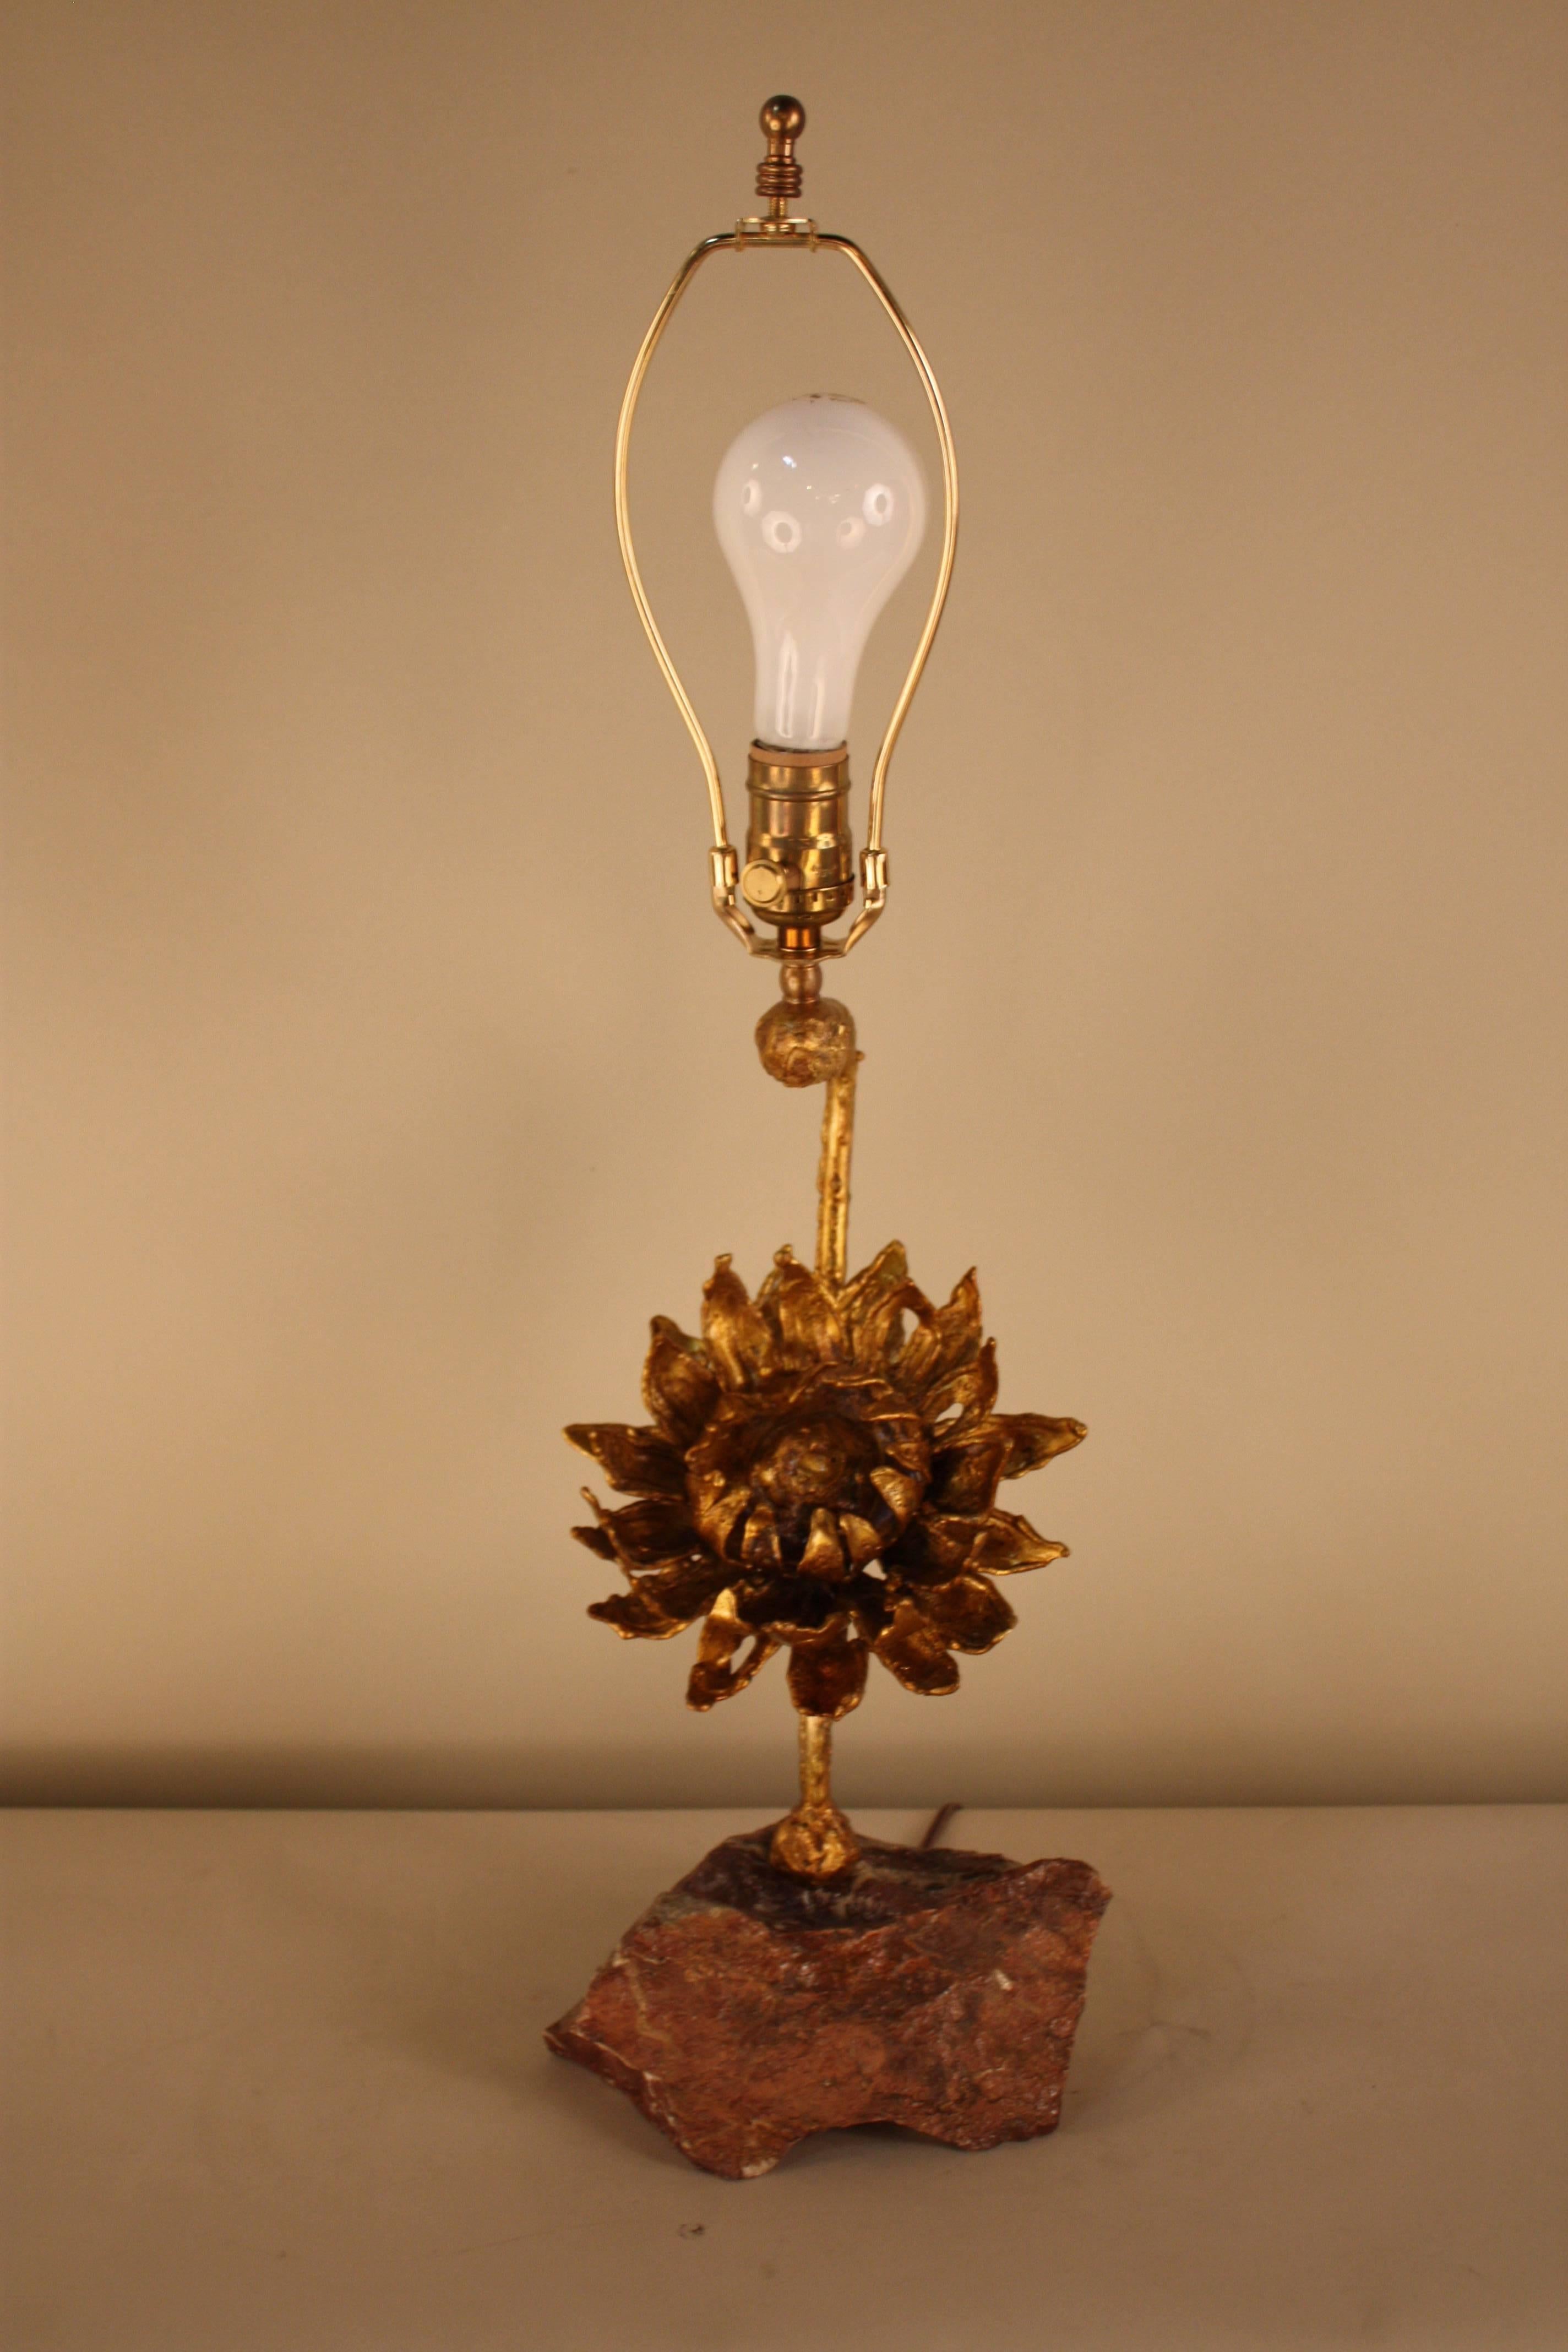 French 1970's gilt bronze sunflower sculpture on wrought red marble Table lamp.
This lamp is fitted with mustered gold silk lampshade. 